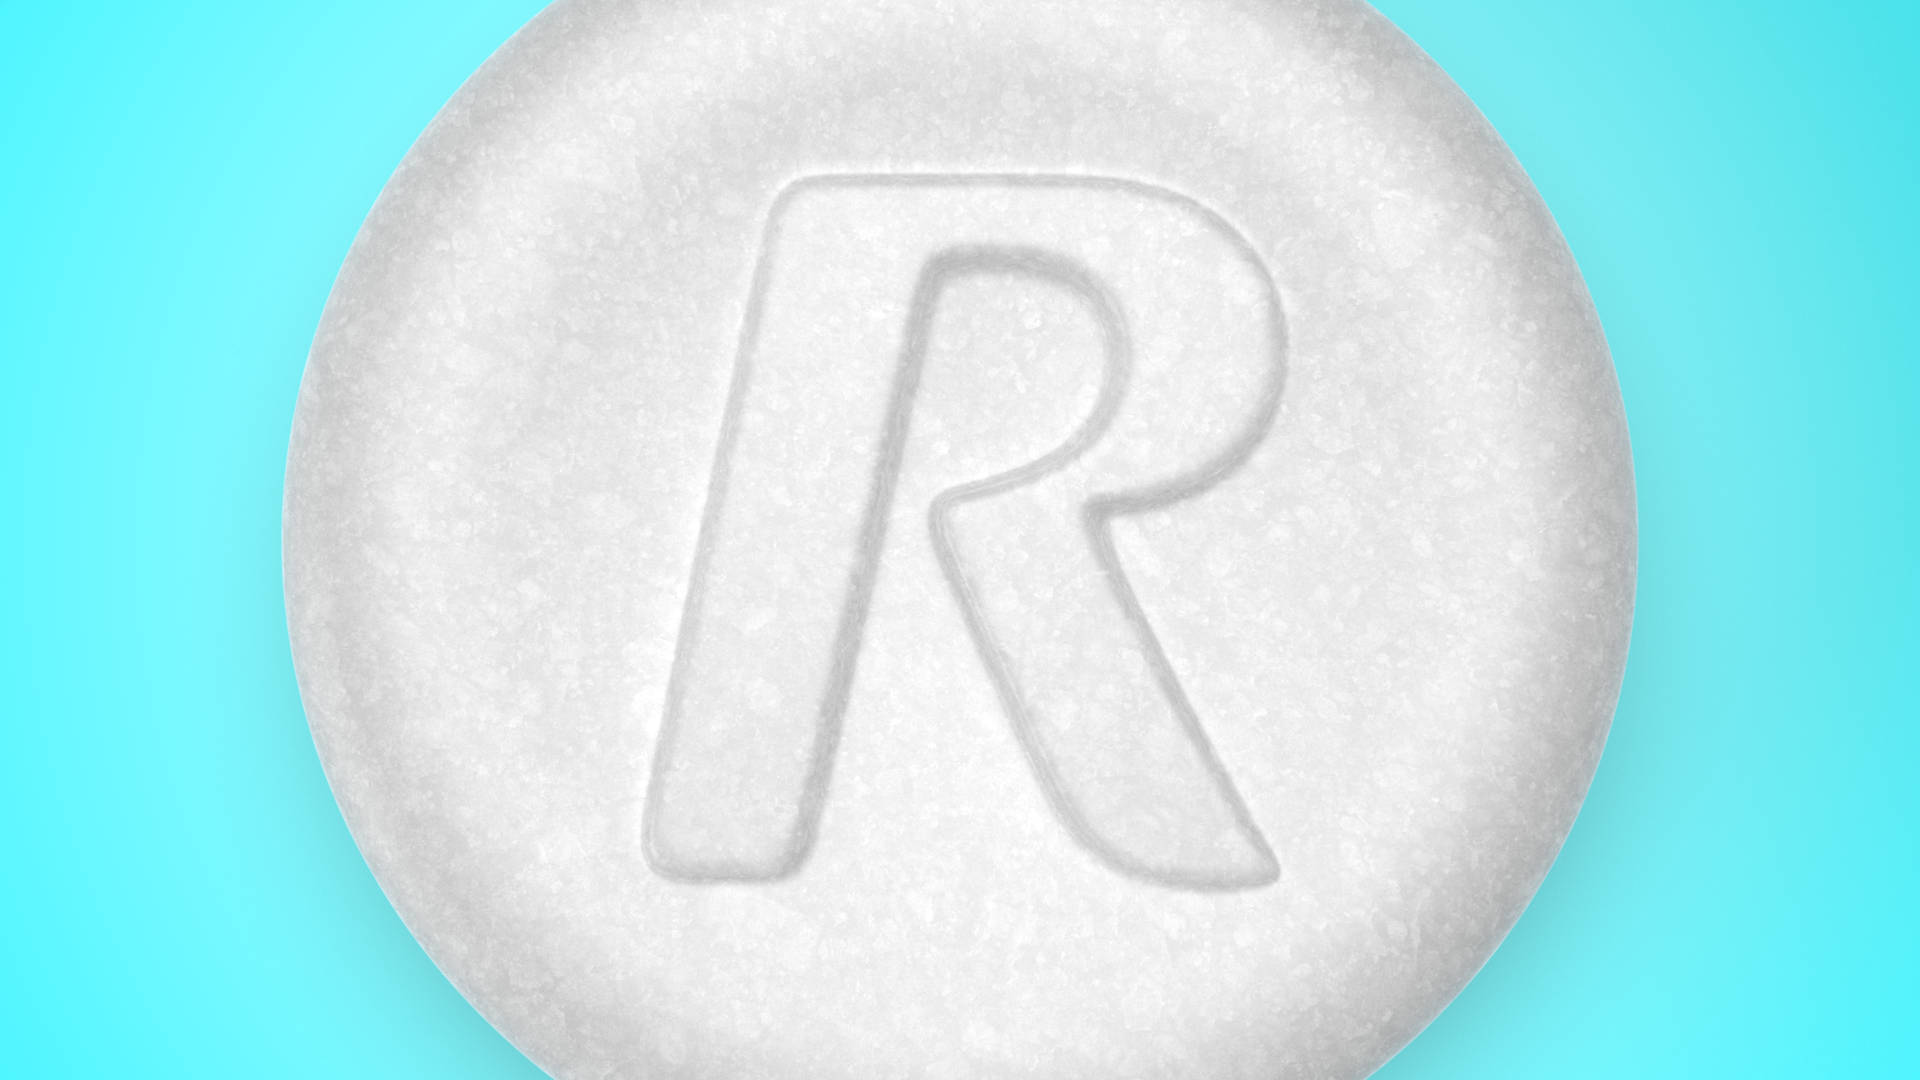 Close-up of a Rolaids tablet on a blue background.